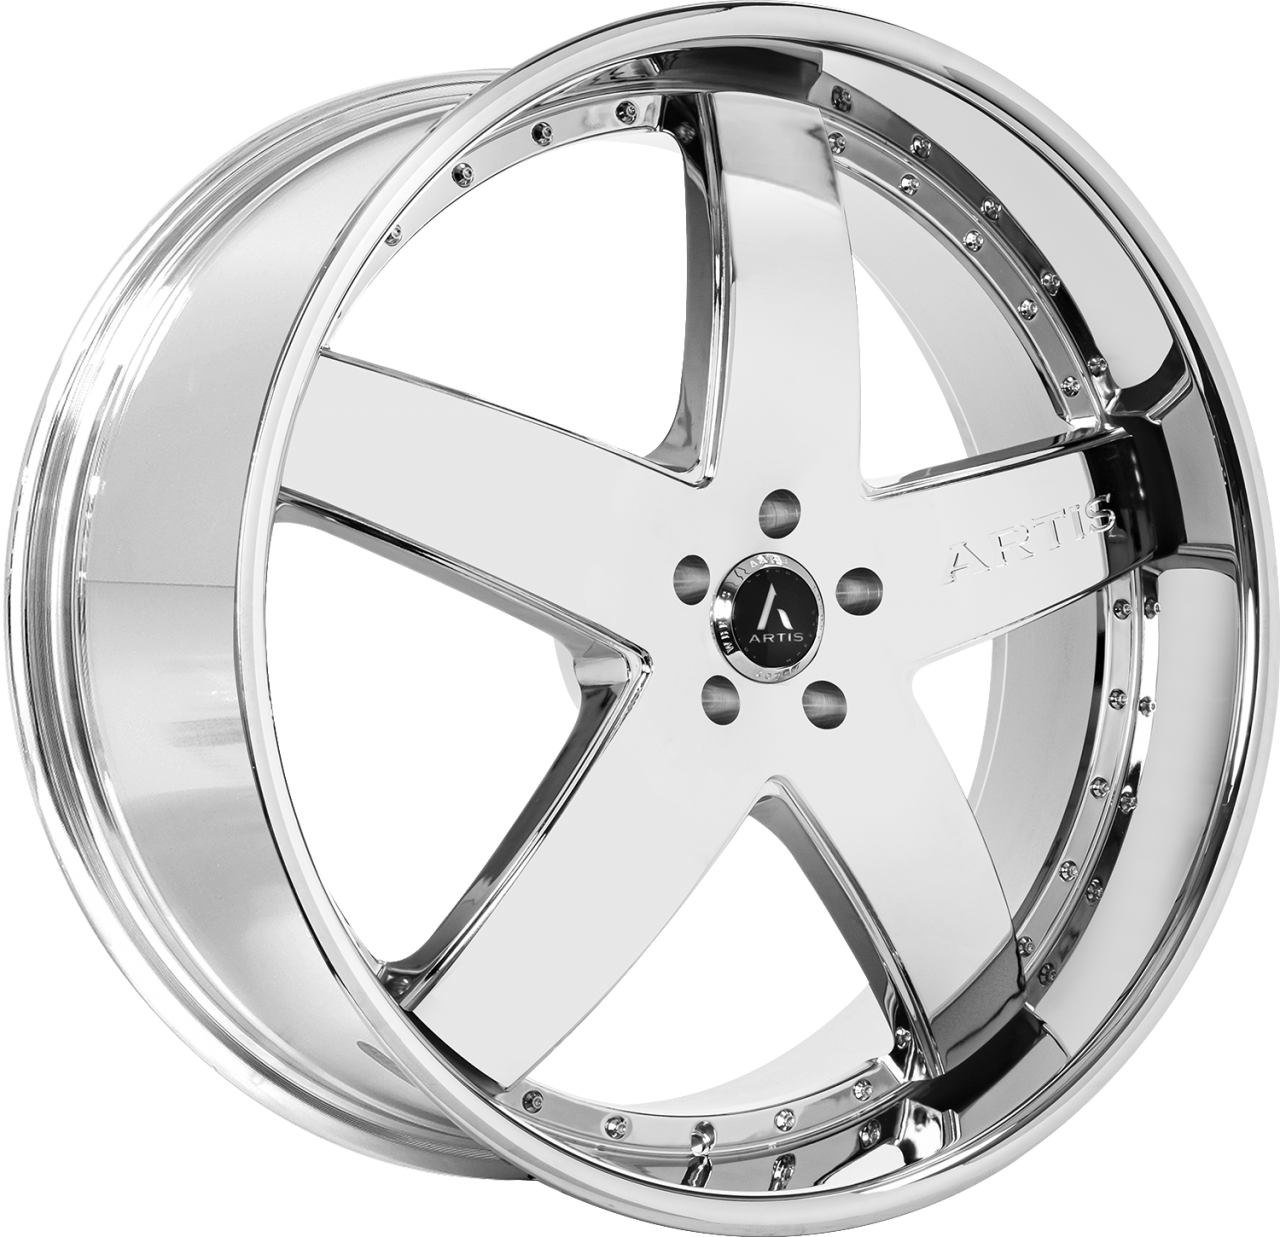 Artis Forged Booya wheel with Chrome finish